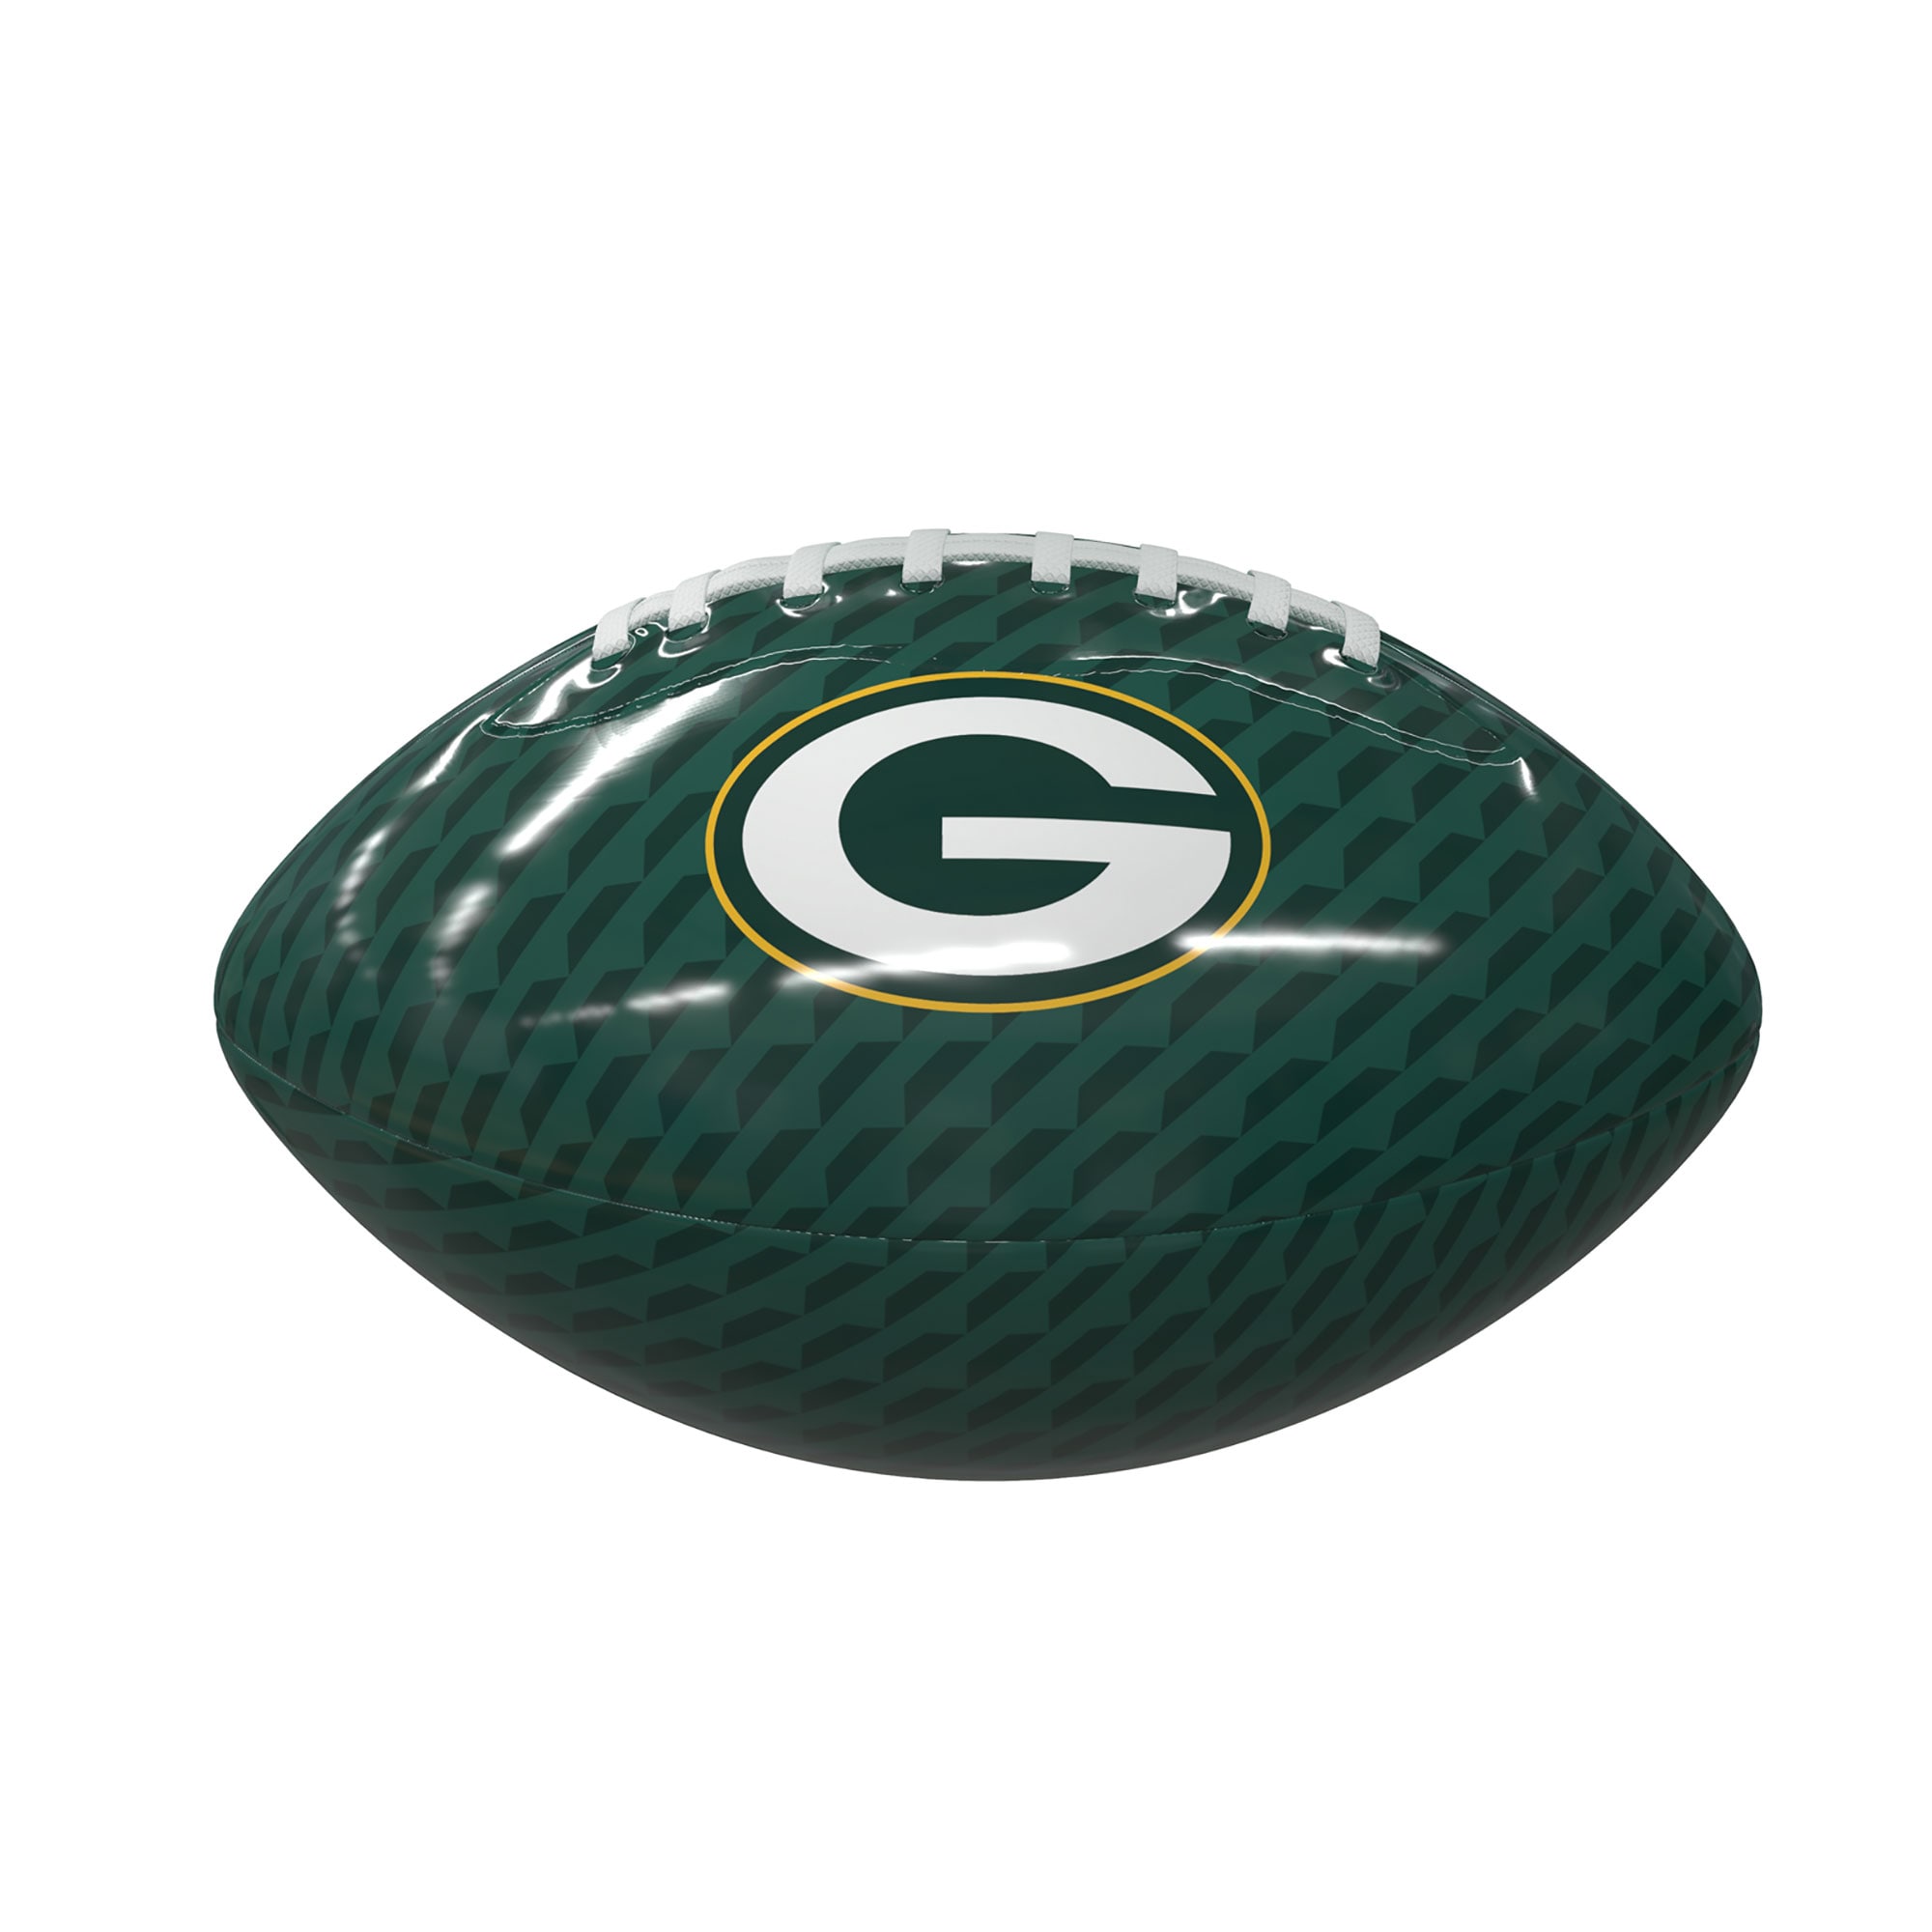 Green Bay Packers Rubber Glossy Mini Football - image 1 of 2